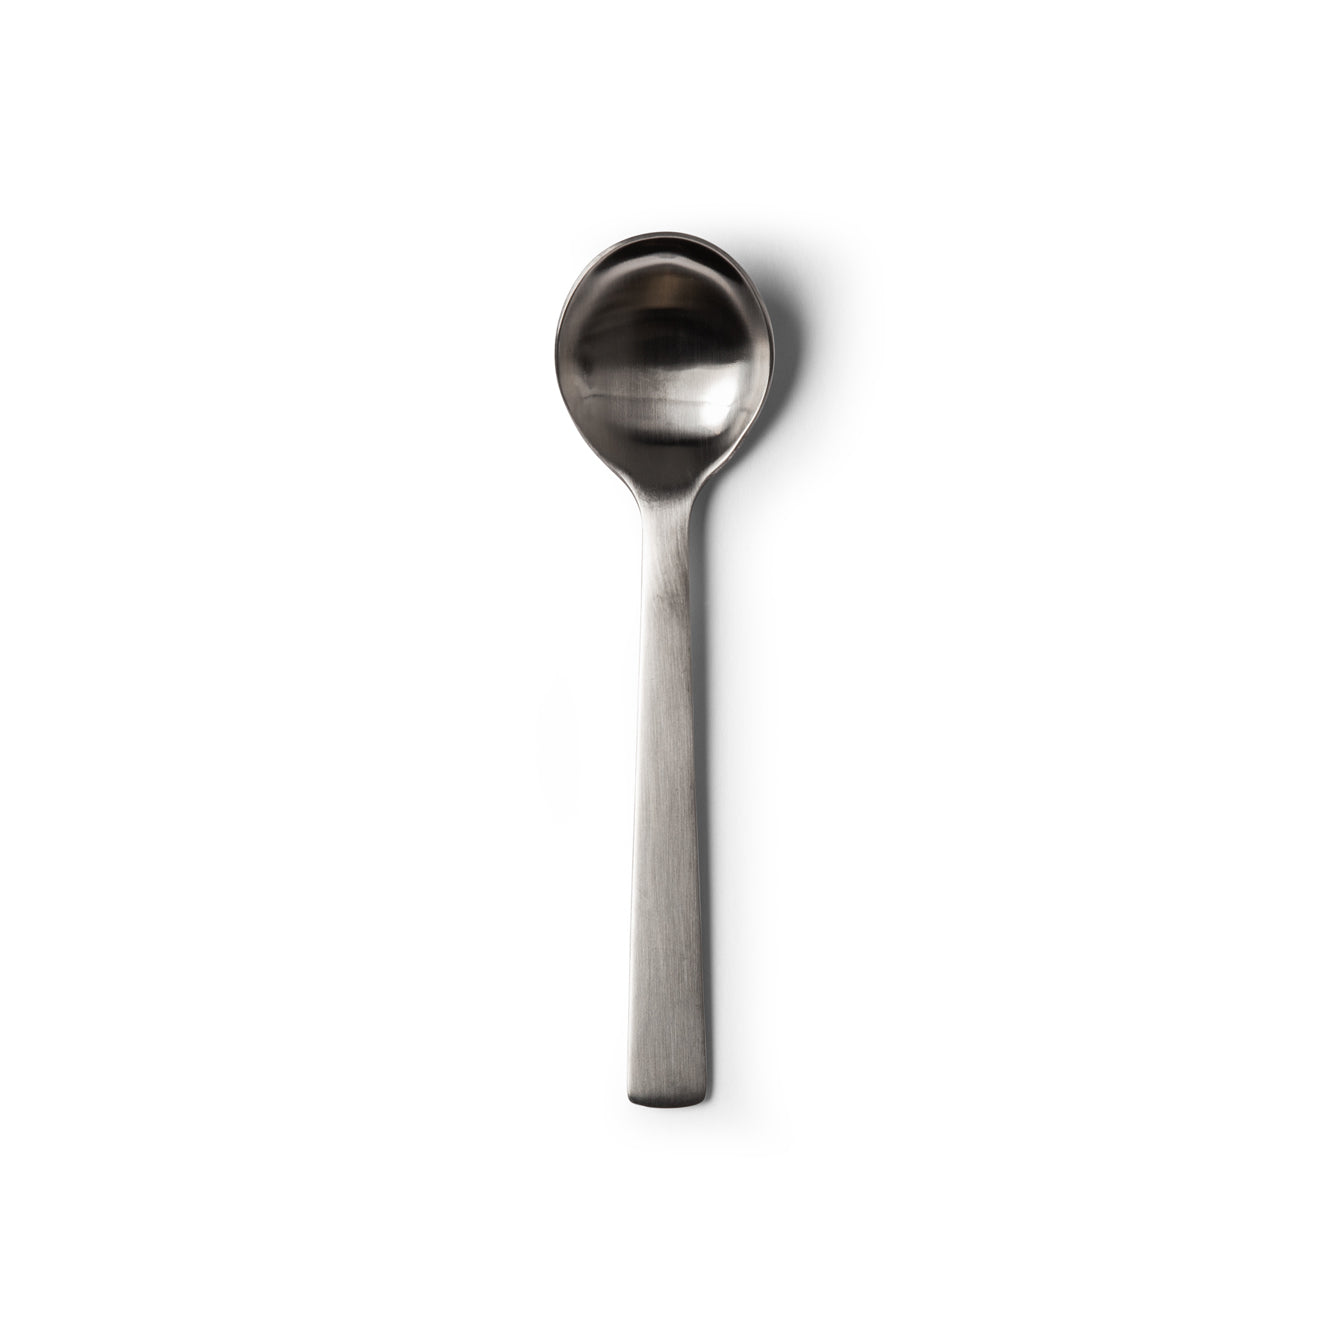 ACME Cups Australia - Brushed Stainless Spoon 12 pack